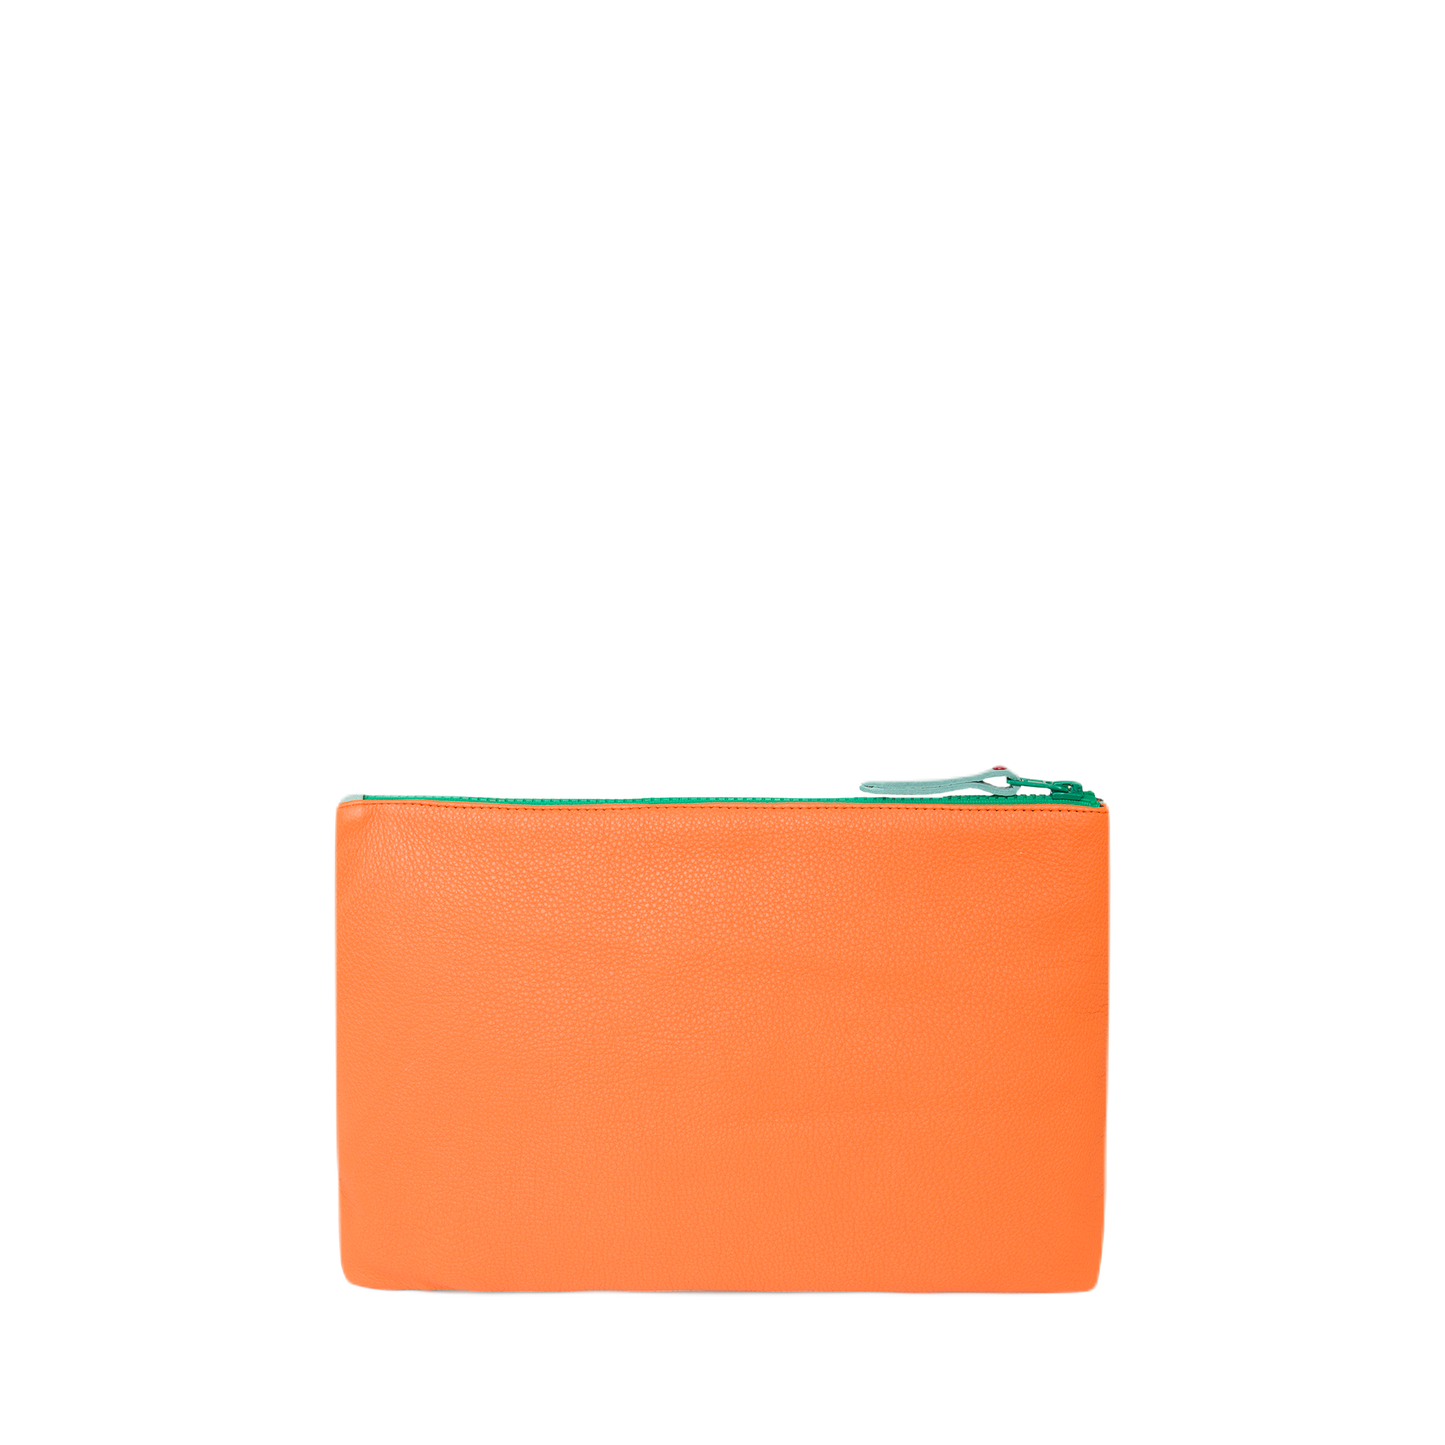 ZIP POUCH Blue and Orange - S